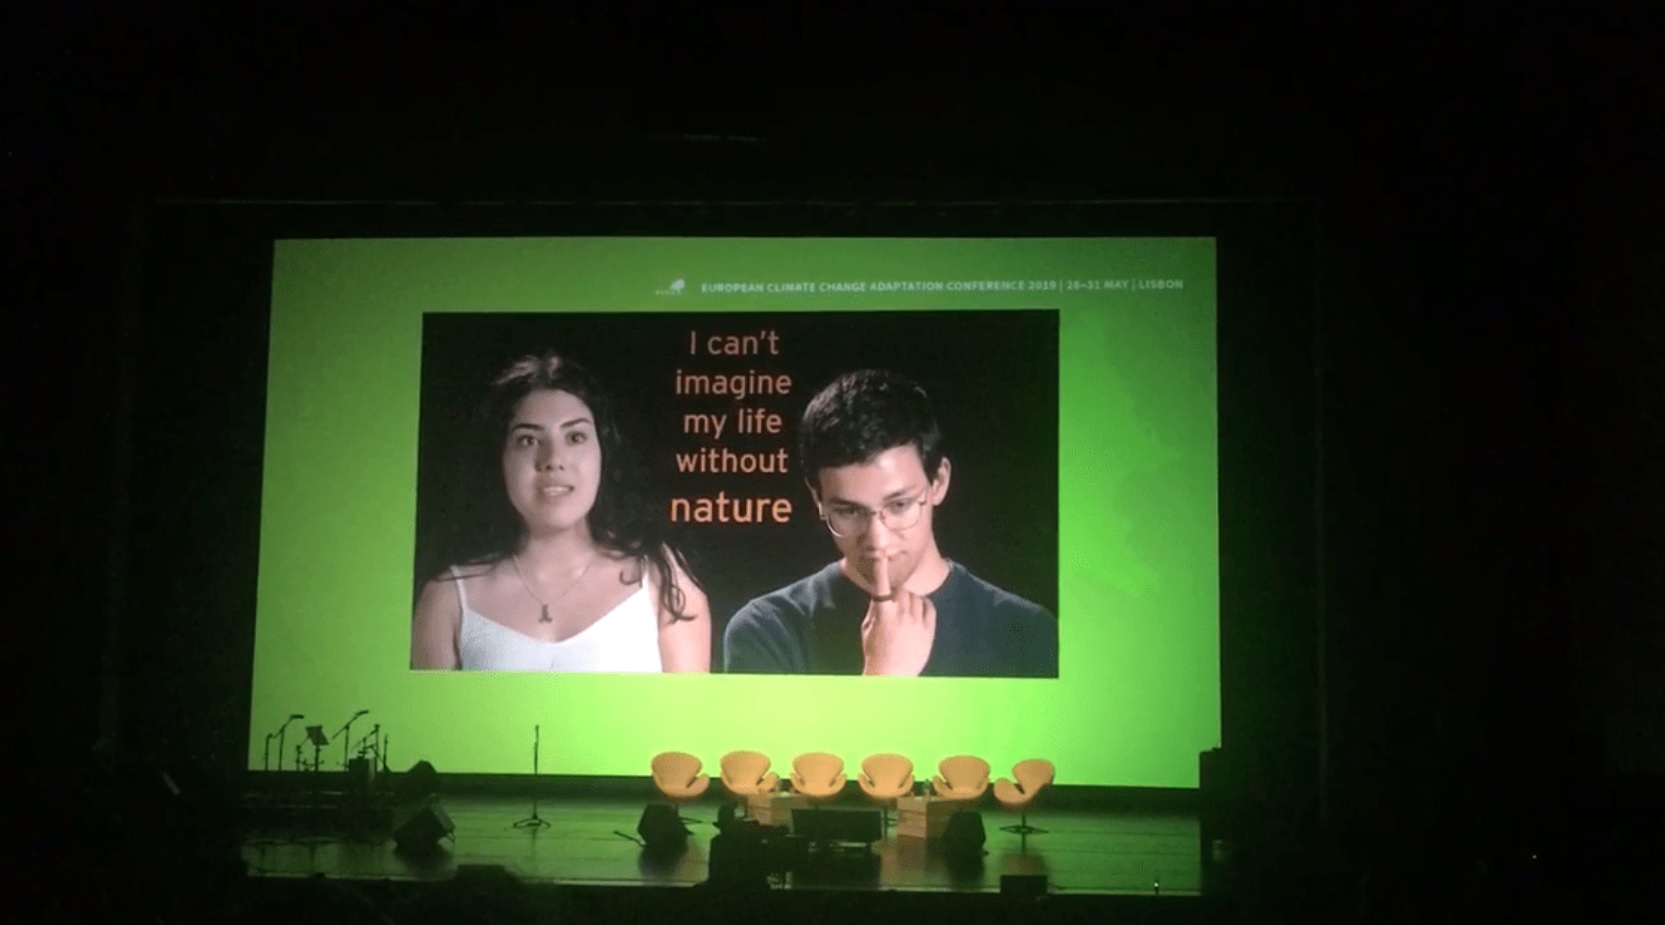 "Young voices" video presented at the 2019 European Climate Change Adaptation conference